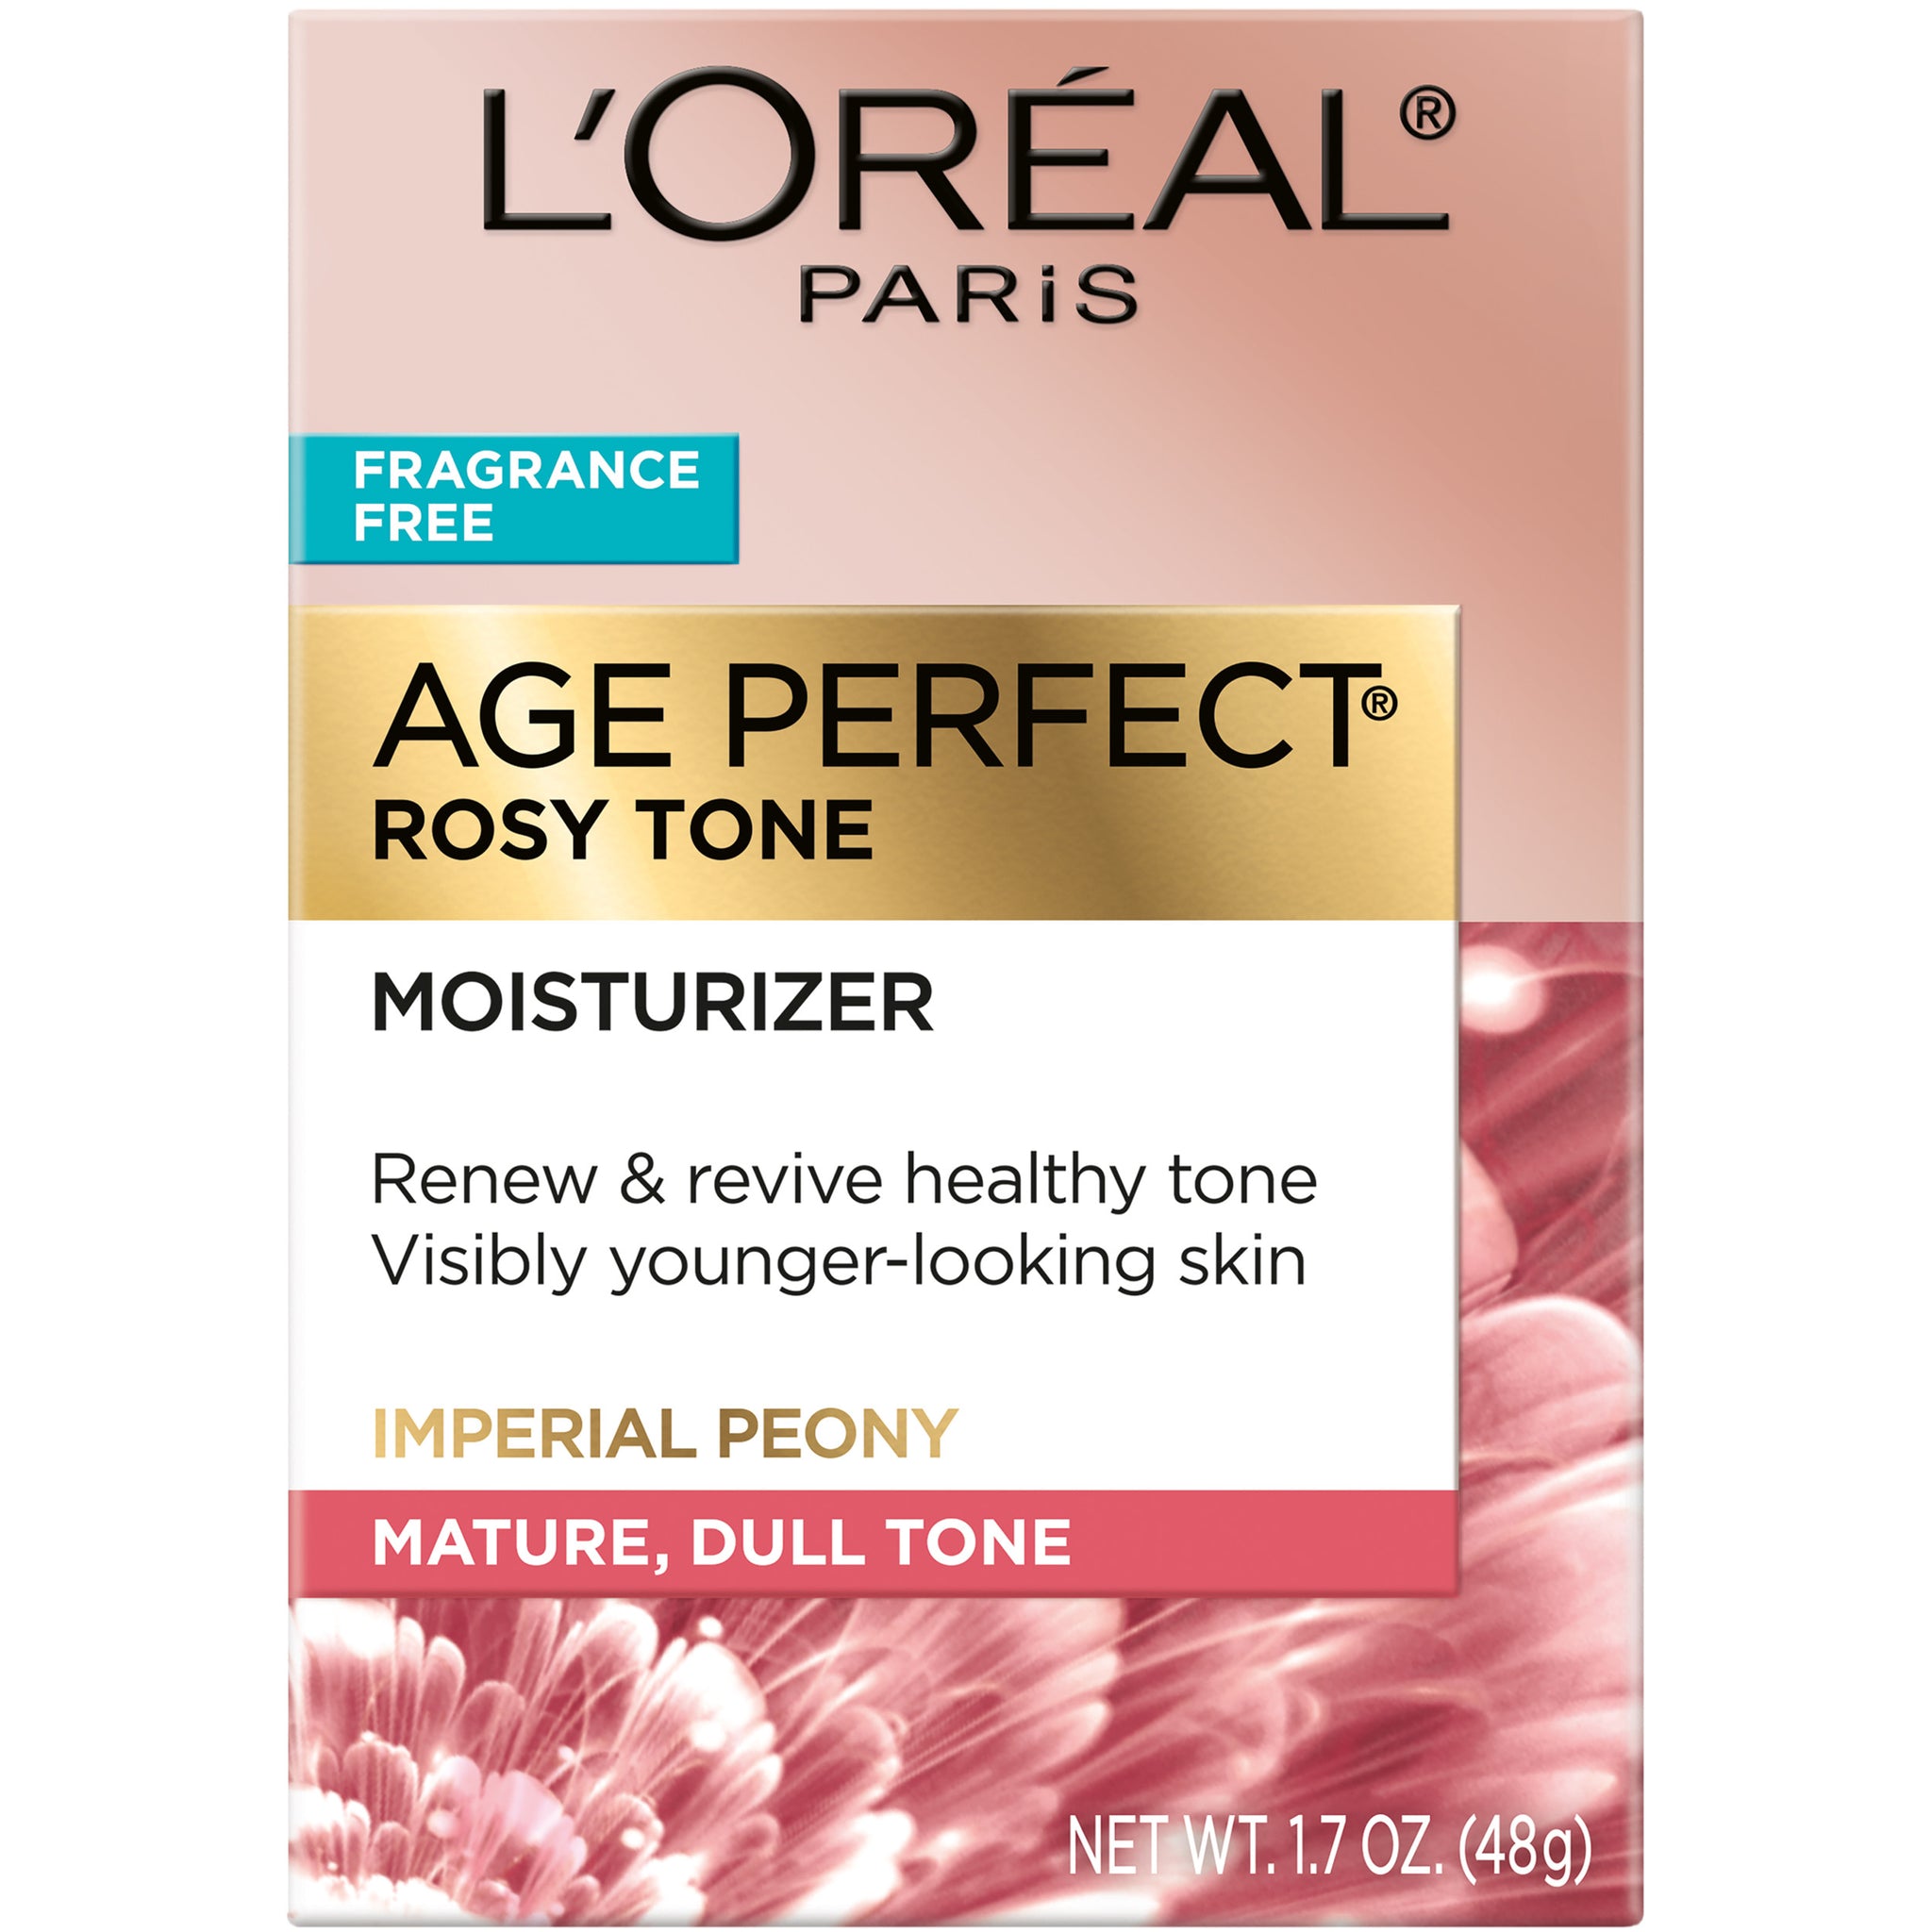 Age Perfect Rosy Tone Fragrance Free Face Moisturizer